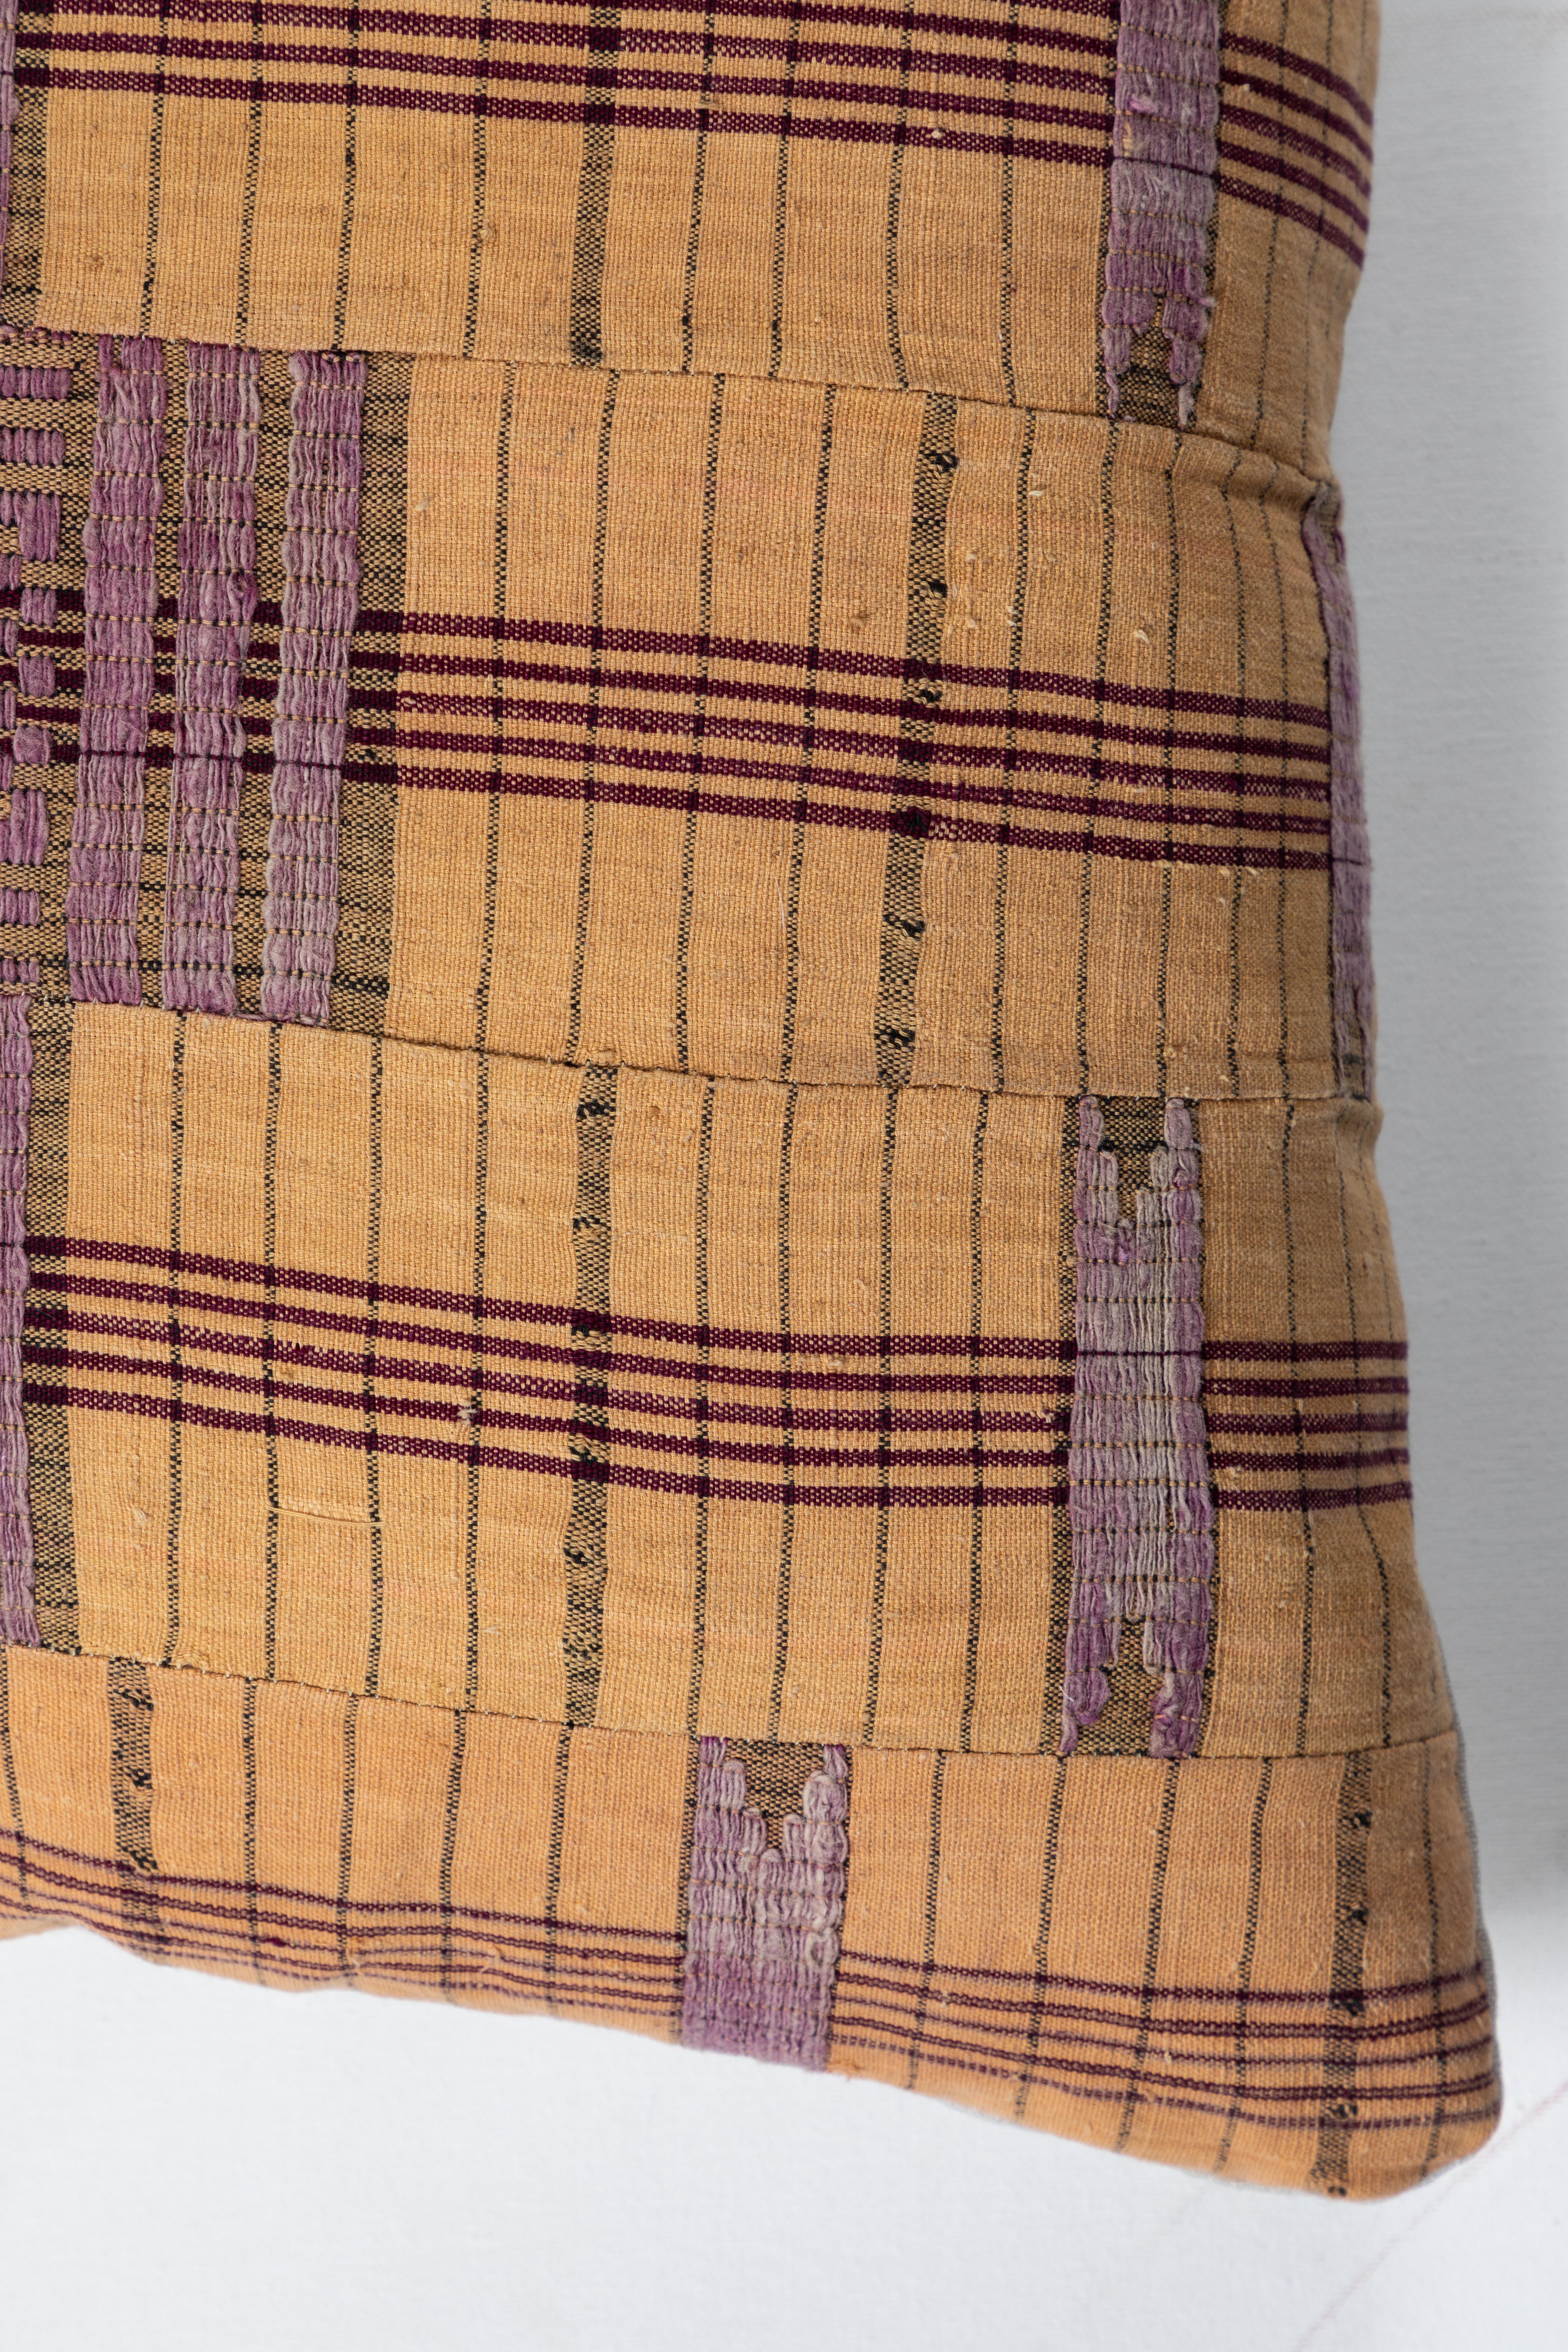 Pillow made using vintage Asoke fabric. Handwoven in Nigeria by the Yoruba peoples. Long strips of cotton and raw silk made on narrow looms and sewn together. Natural linen back. Invisible zipper and feather and down fill.